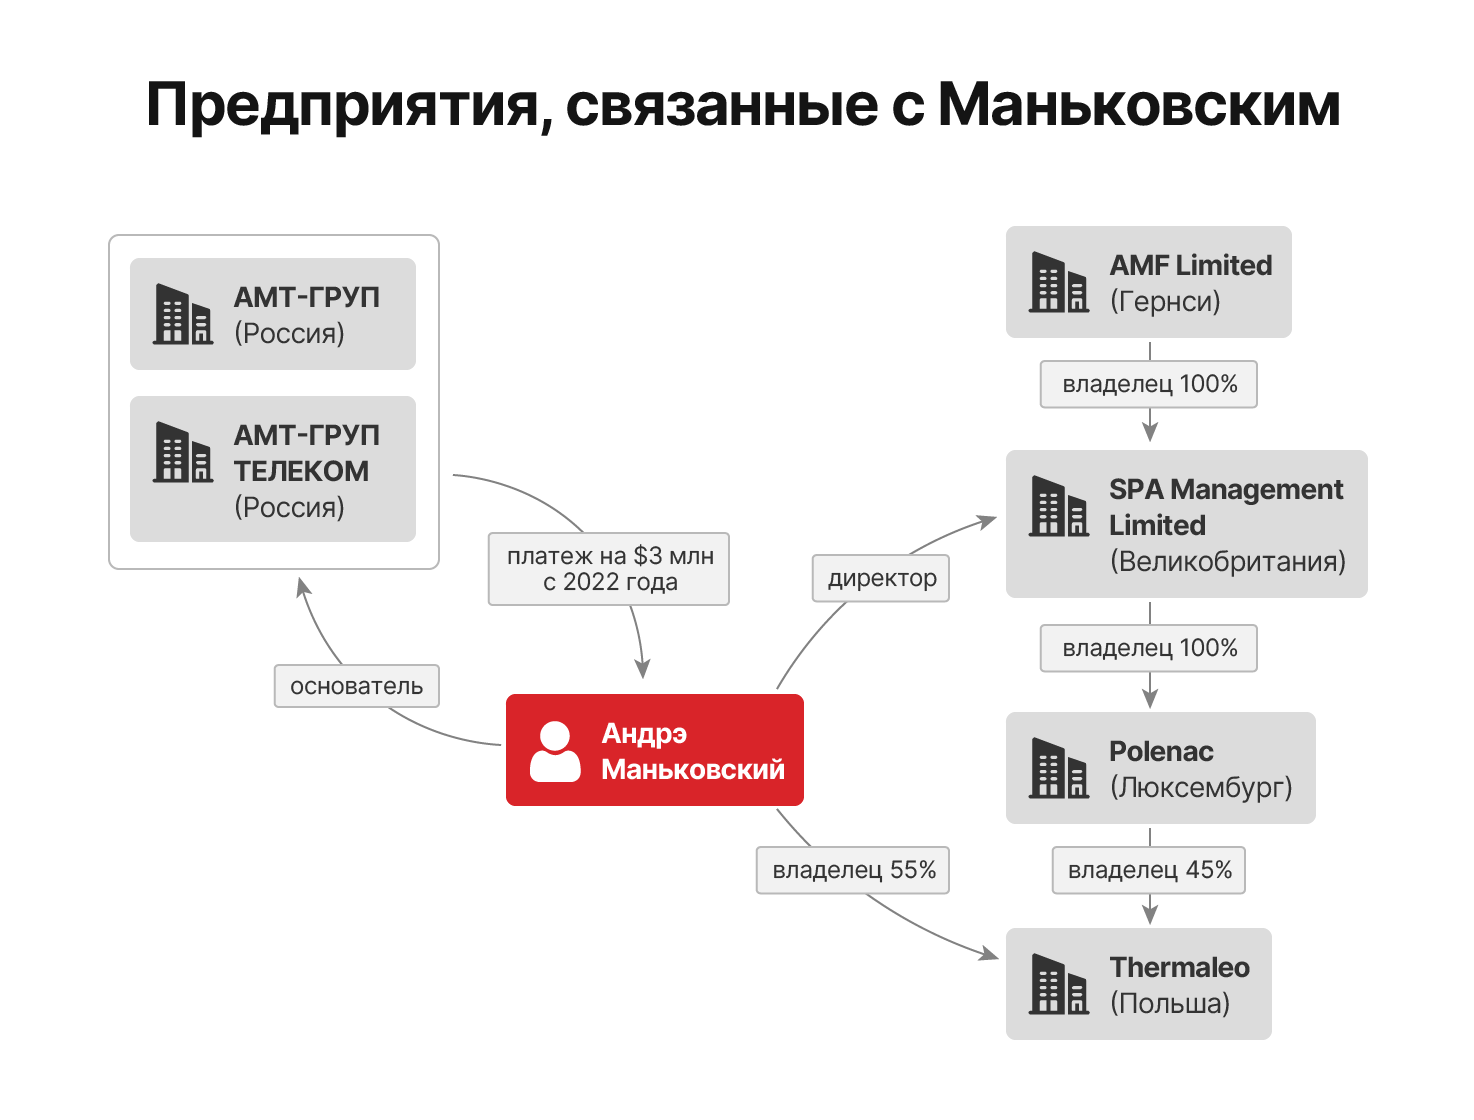 investigations/mankowski-ownership-rus.png